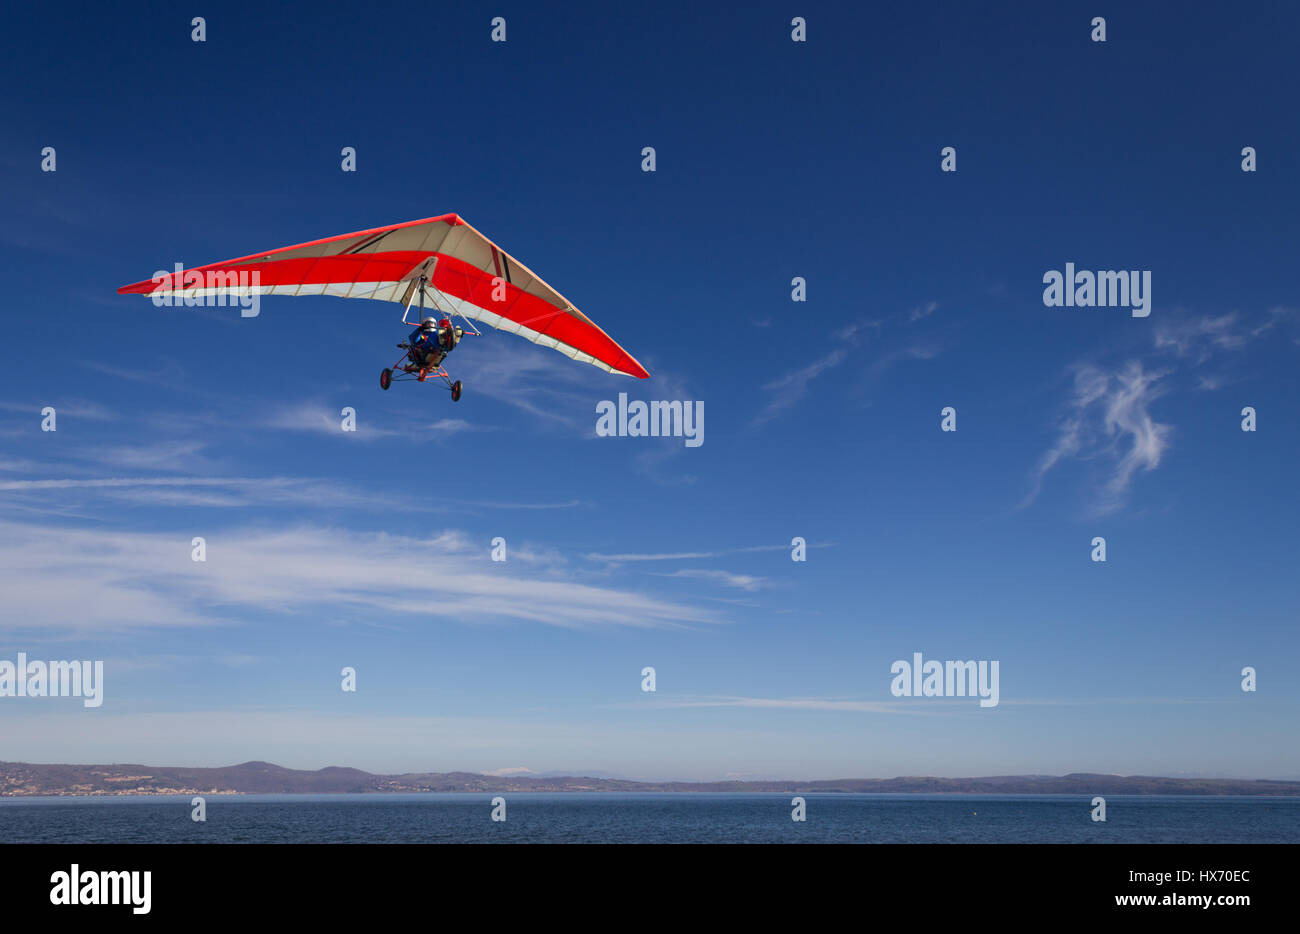 an hang glider flying over Bracciano lak,e, near Rome, italy in a very clear, sunny day Stock Photo